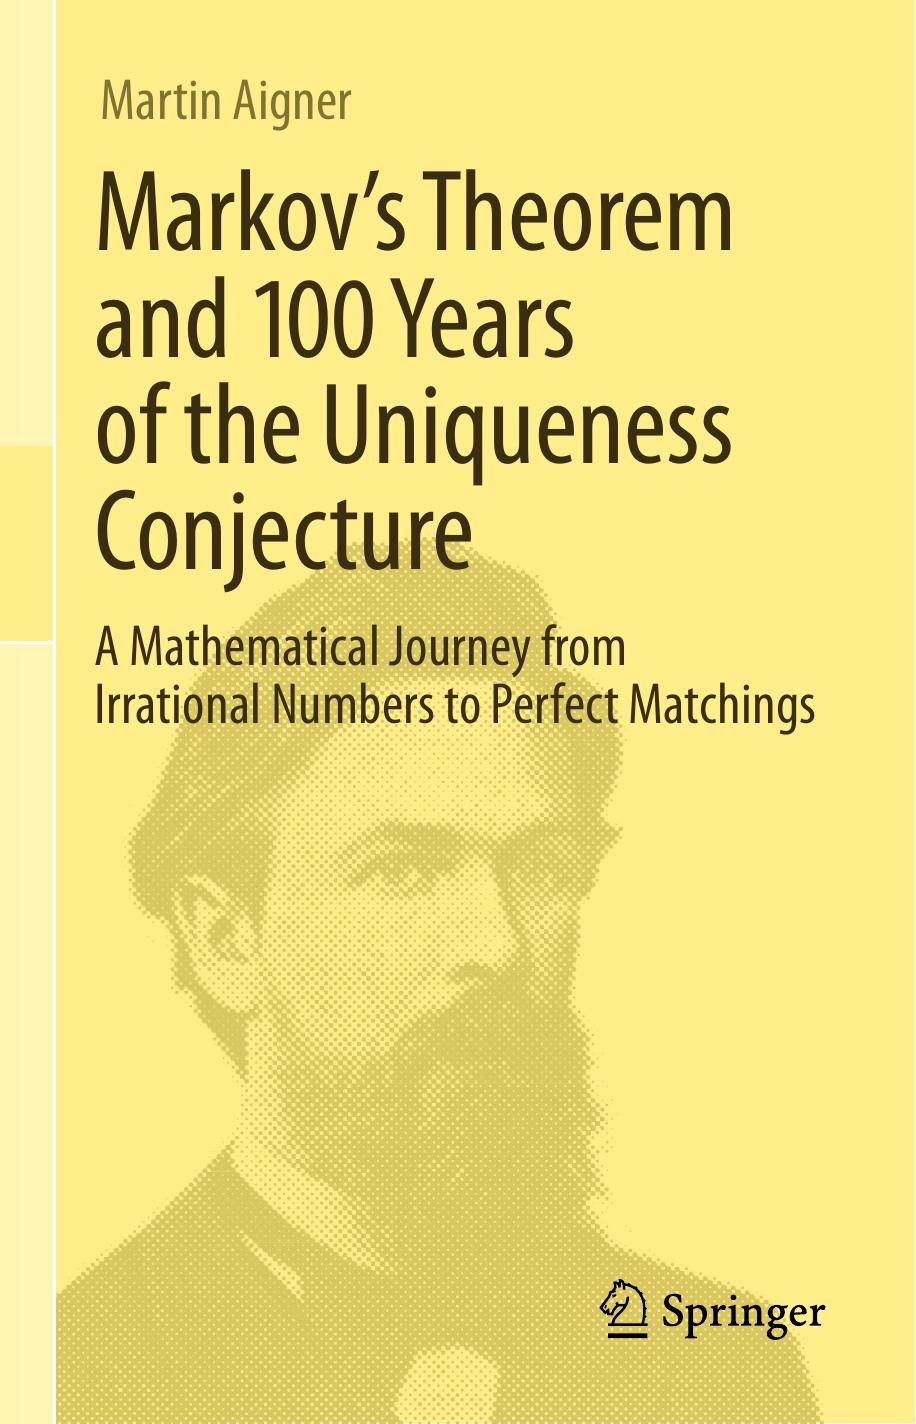 Markov's Theorem and 100 Years of the Uniqueness Conjecture: A Mathematical Journey From Irrational Numbers to Perfect Matchings